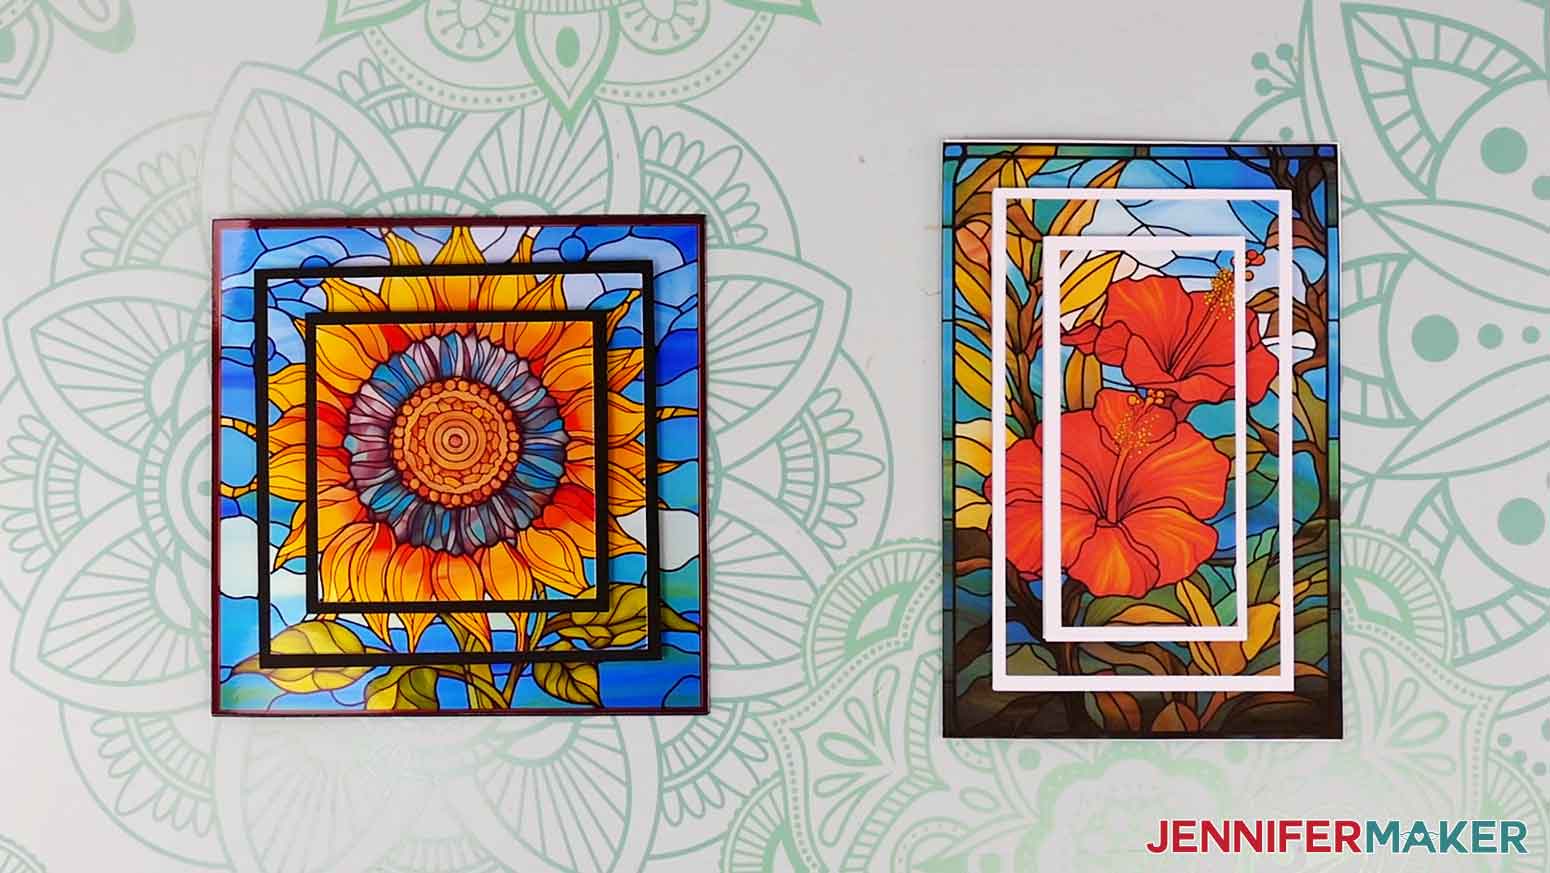 Two complete Stained Glass Card designs.